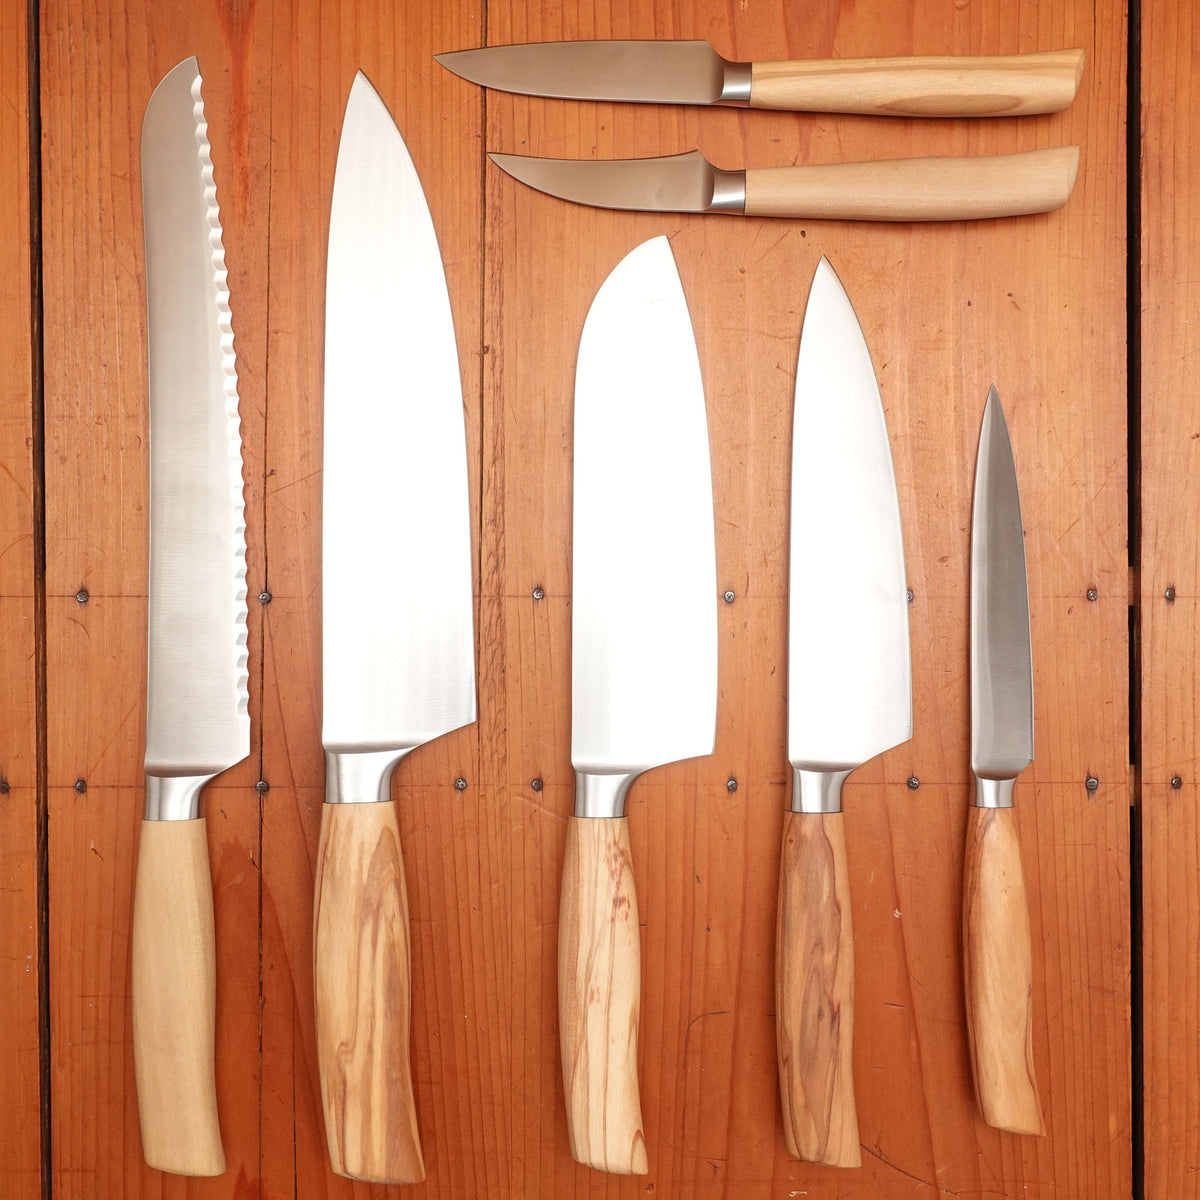 Friedr Herder Madera Forged Stainless Olive 1/2 Bolster Knife Set - 7 Pieces